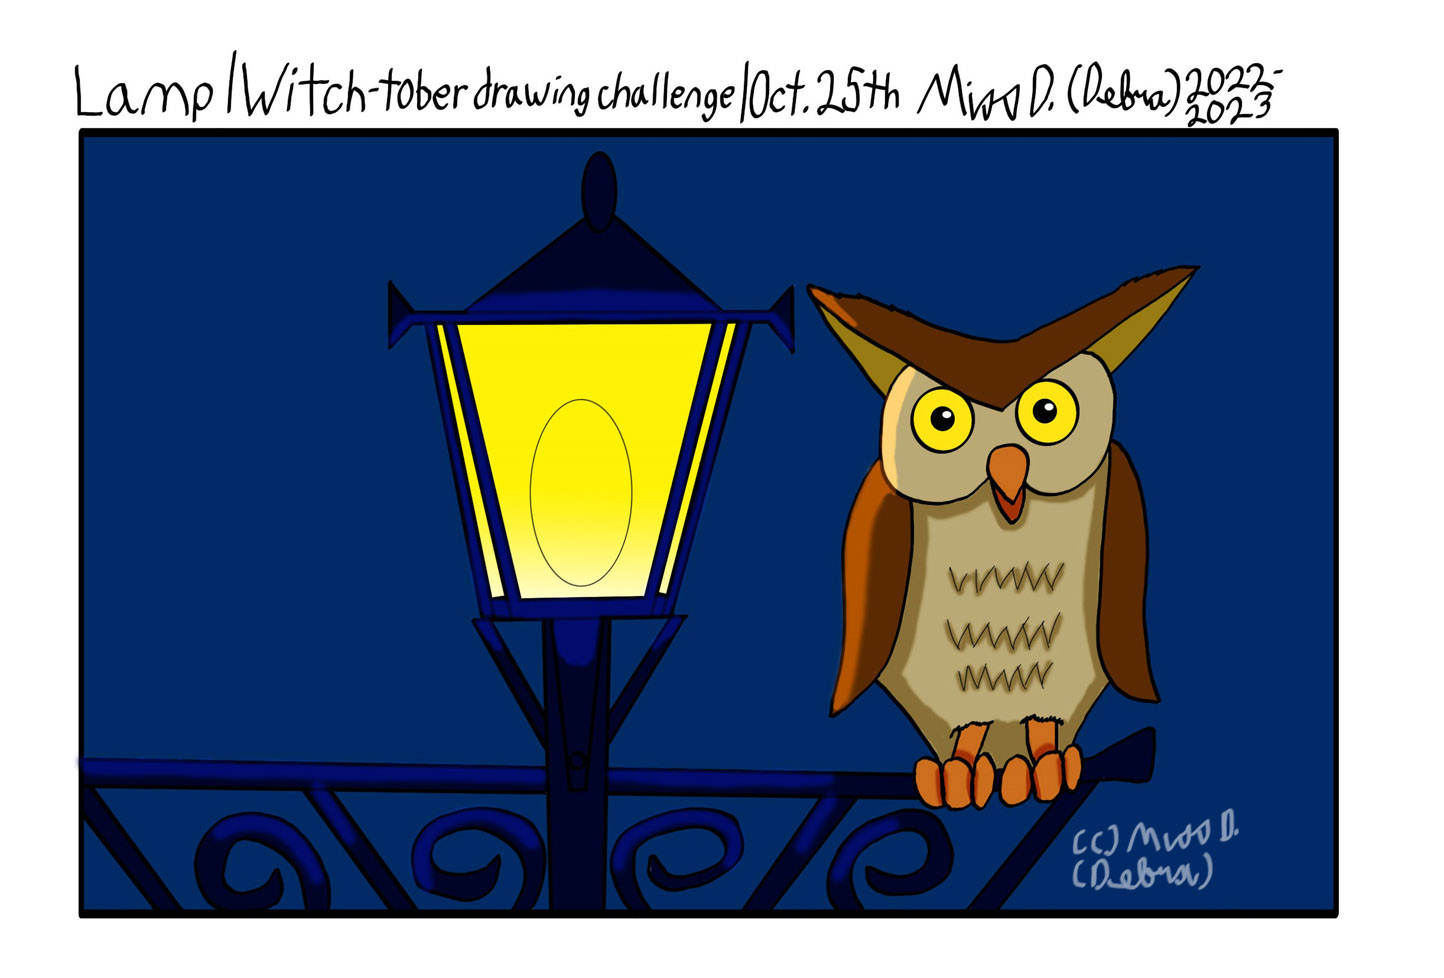 LAMP - Witch-Tober Drawing Challenge Oct. 25th